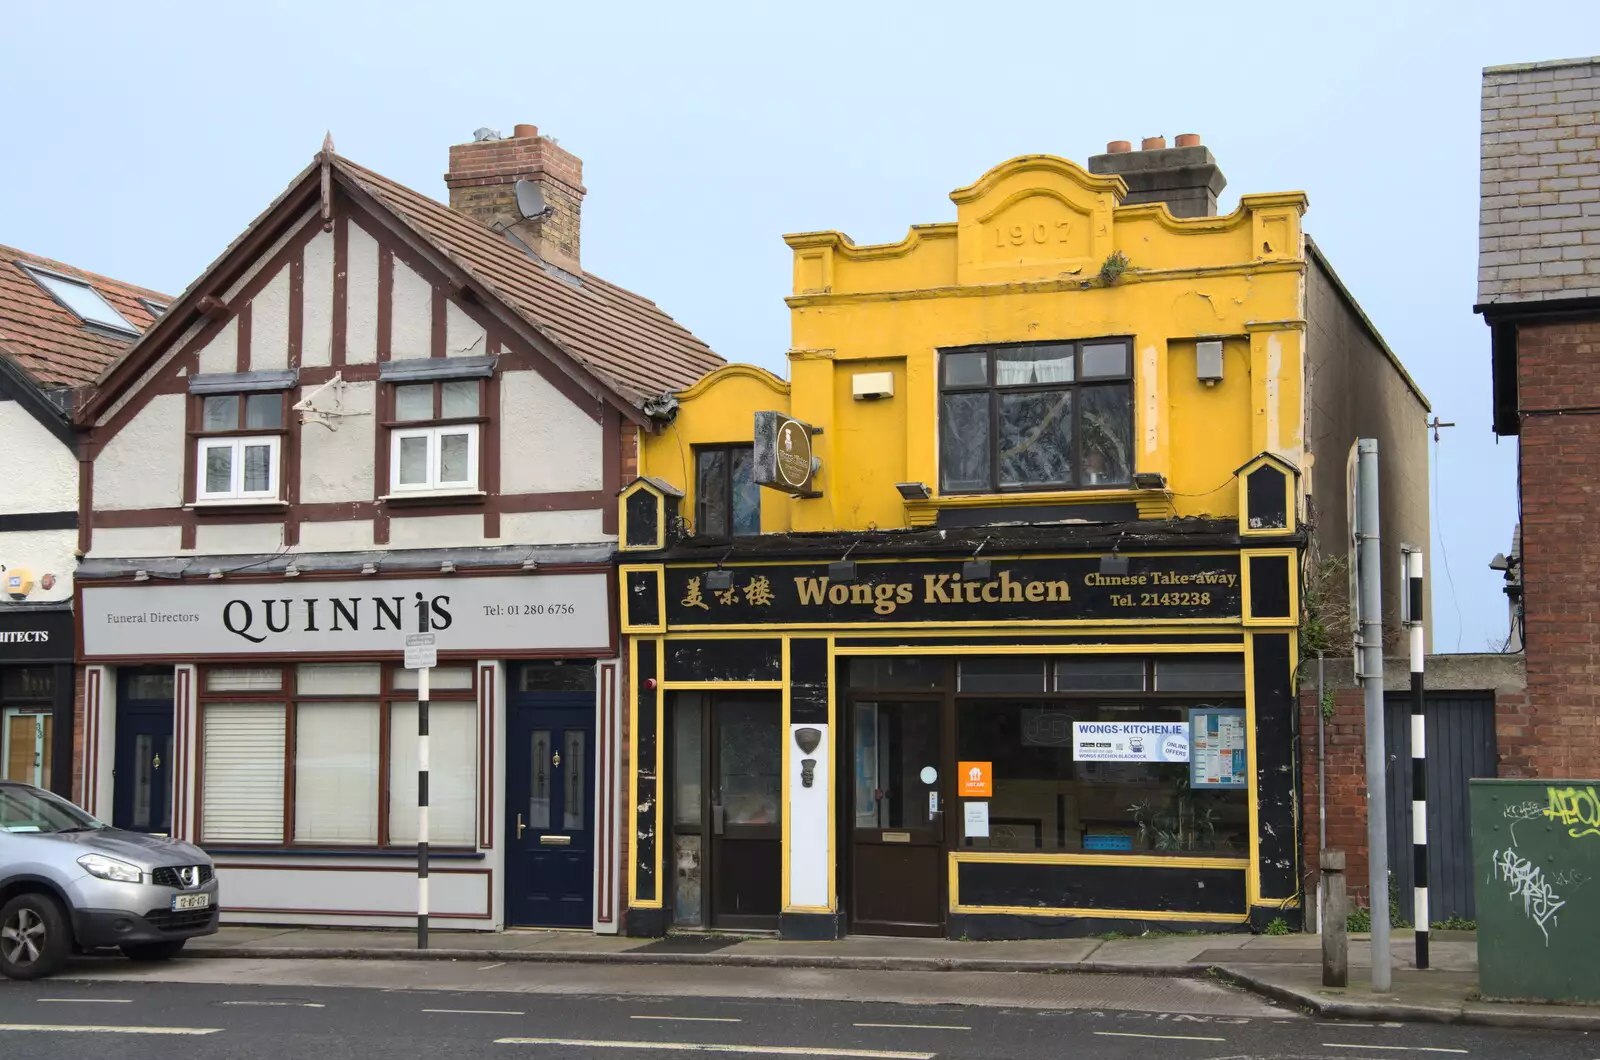 An Edwardian building from 1907, now a takeaway, from The End of the Breffni, Blackrock, Dublin - 18th February 2023